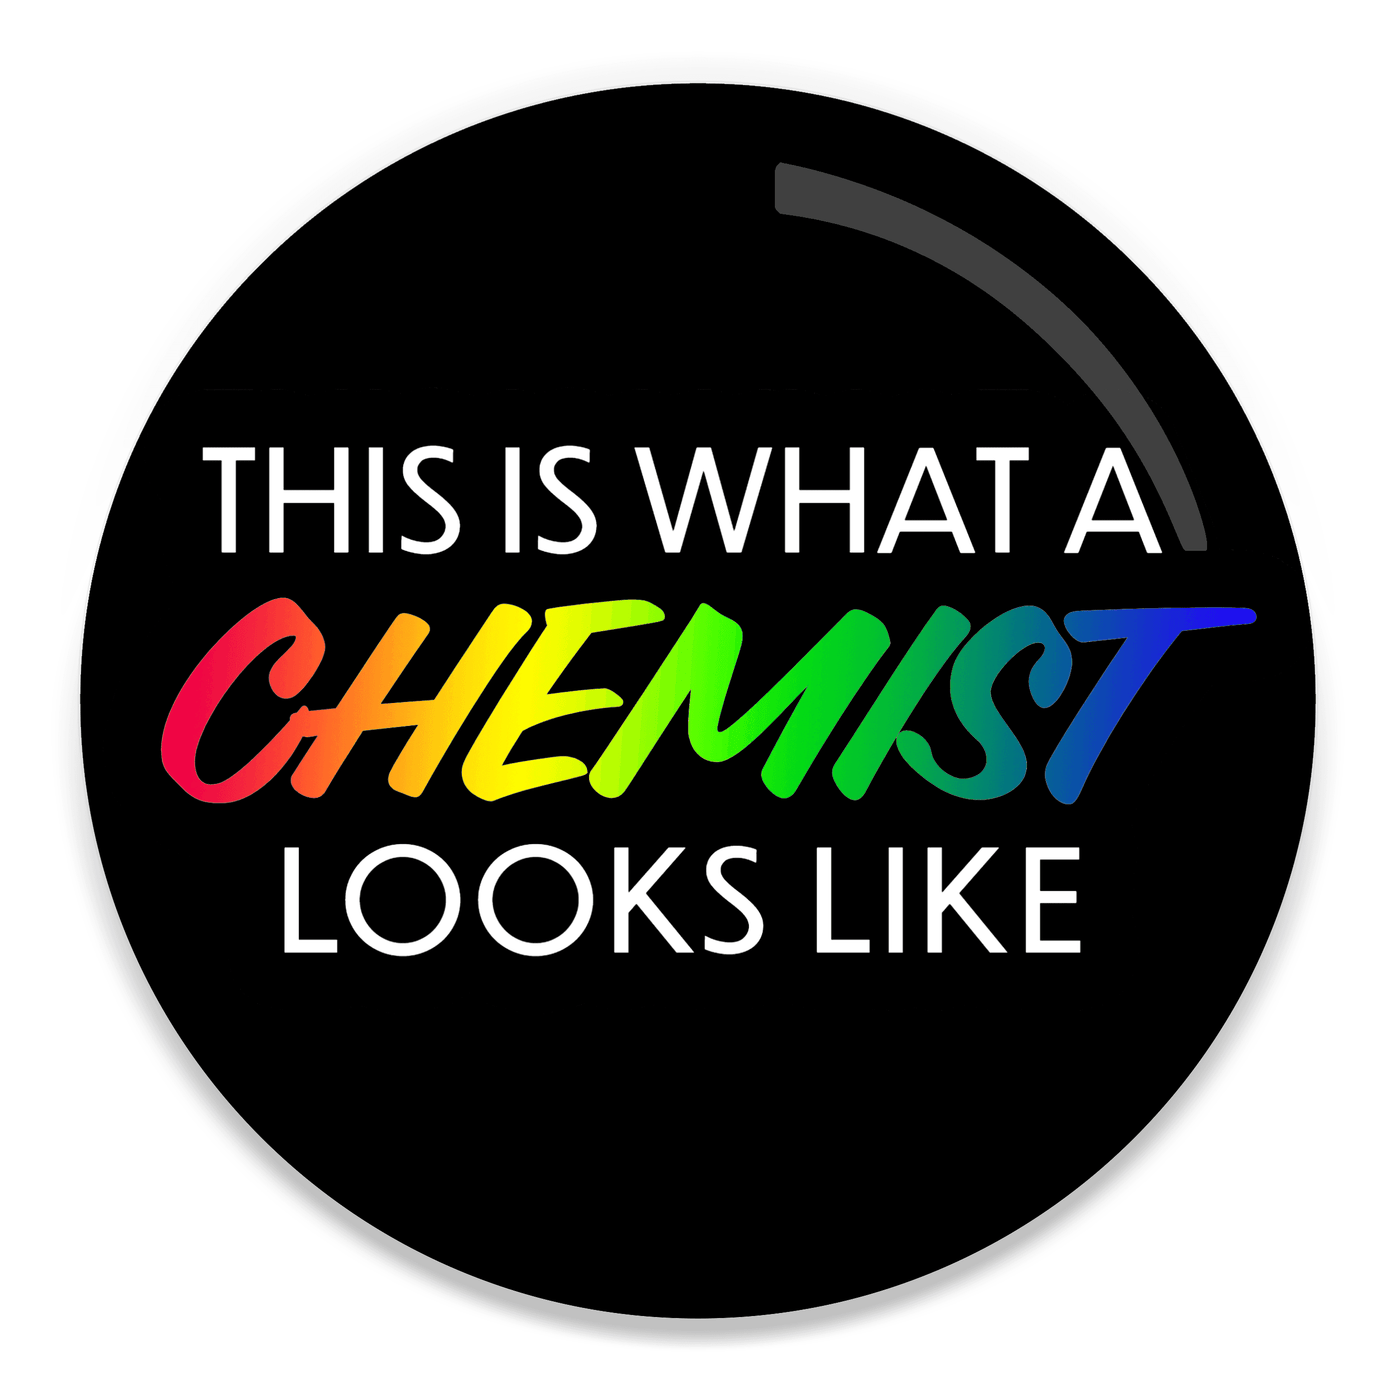 2.25 inch round colorful magnet with image of a rainbowy work chemist